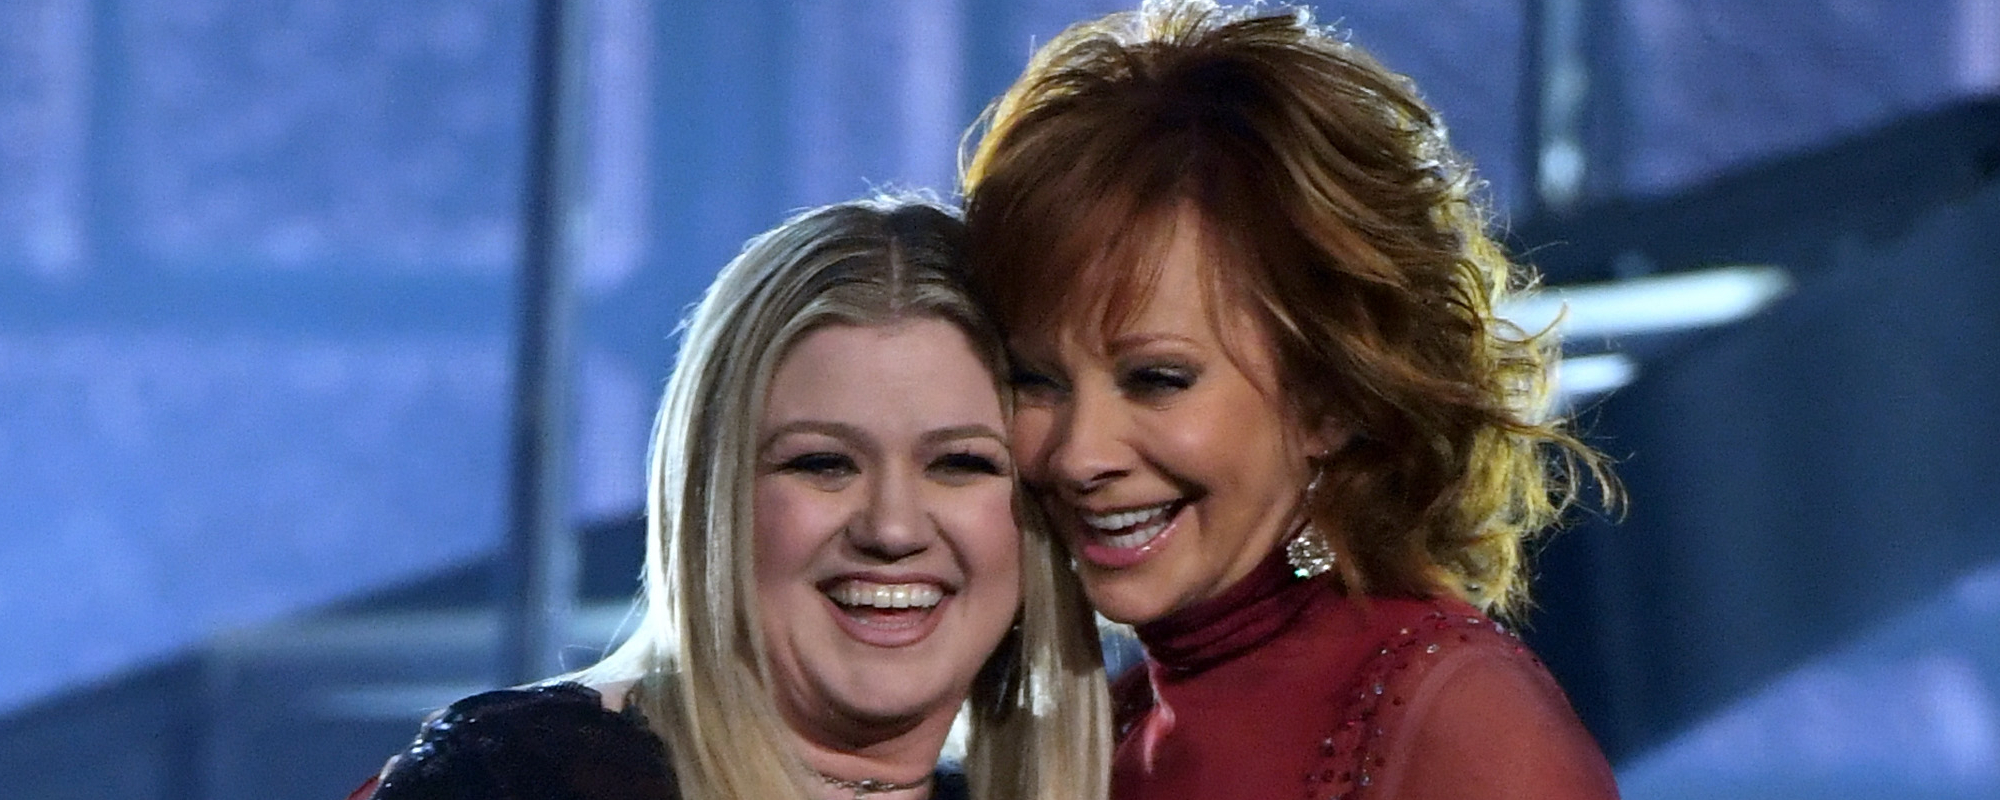 Reba McEntire Shares Sweet Messages to Kelly Clarkson After Her Beautiful Rendition of “Till You Love Me”